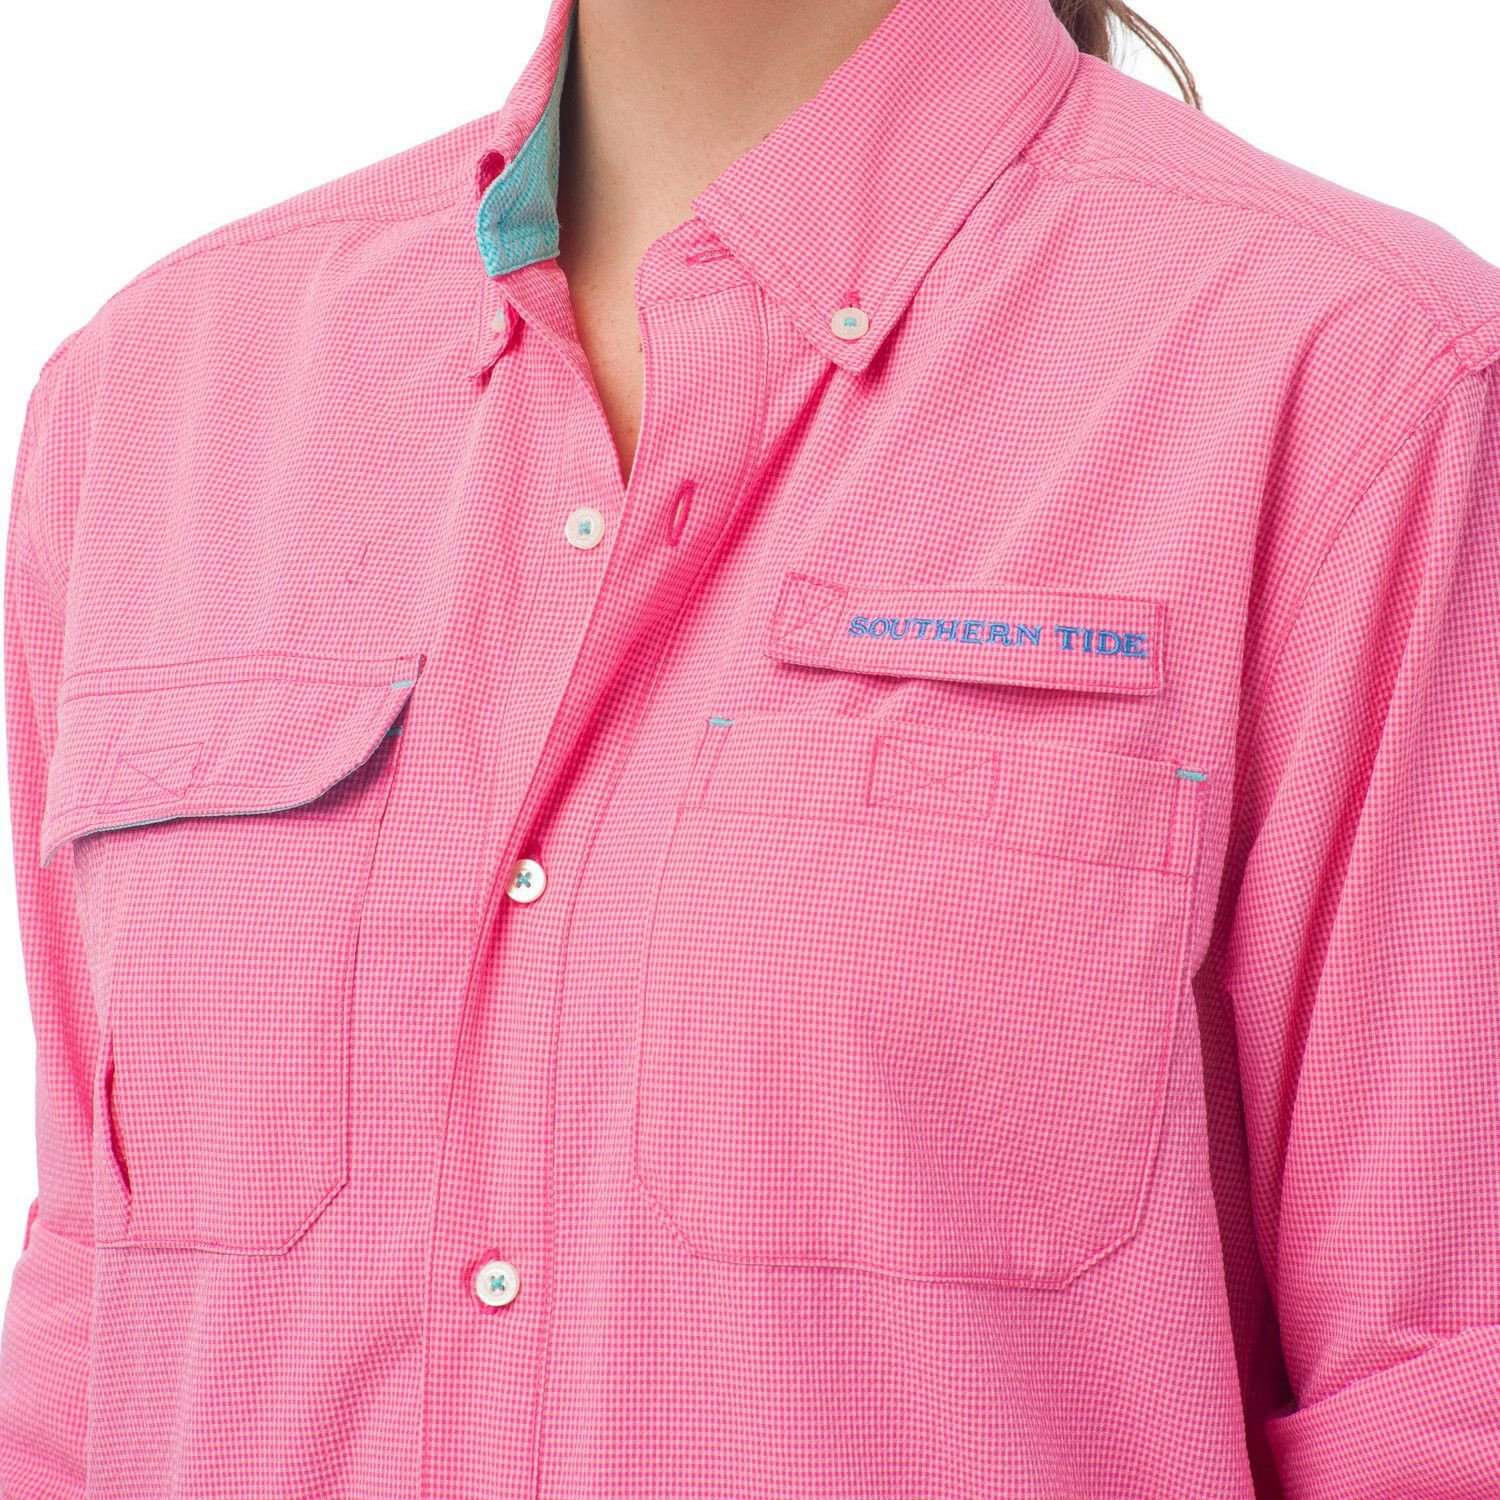 Women's Sullivan Fishing Shirt in Berry Check by Southern Tide